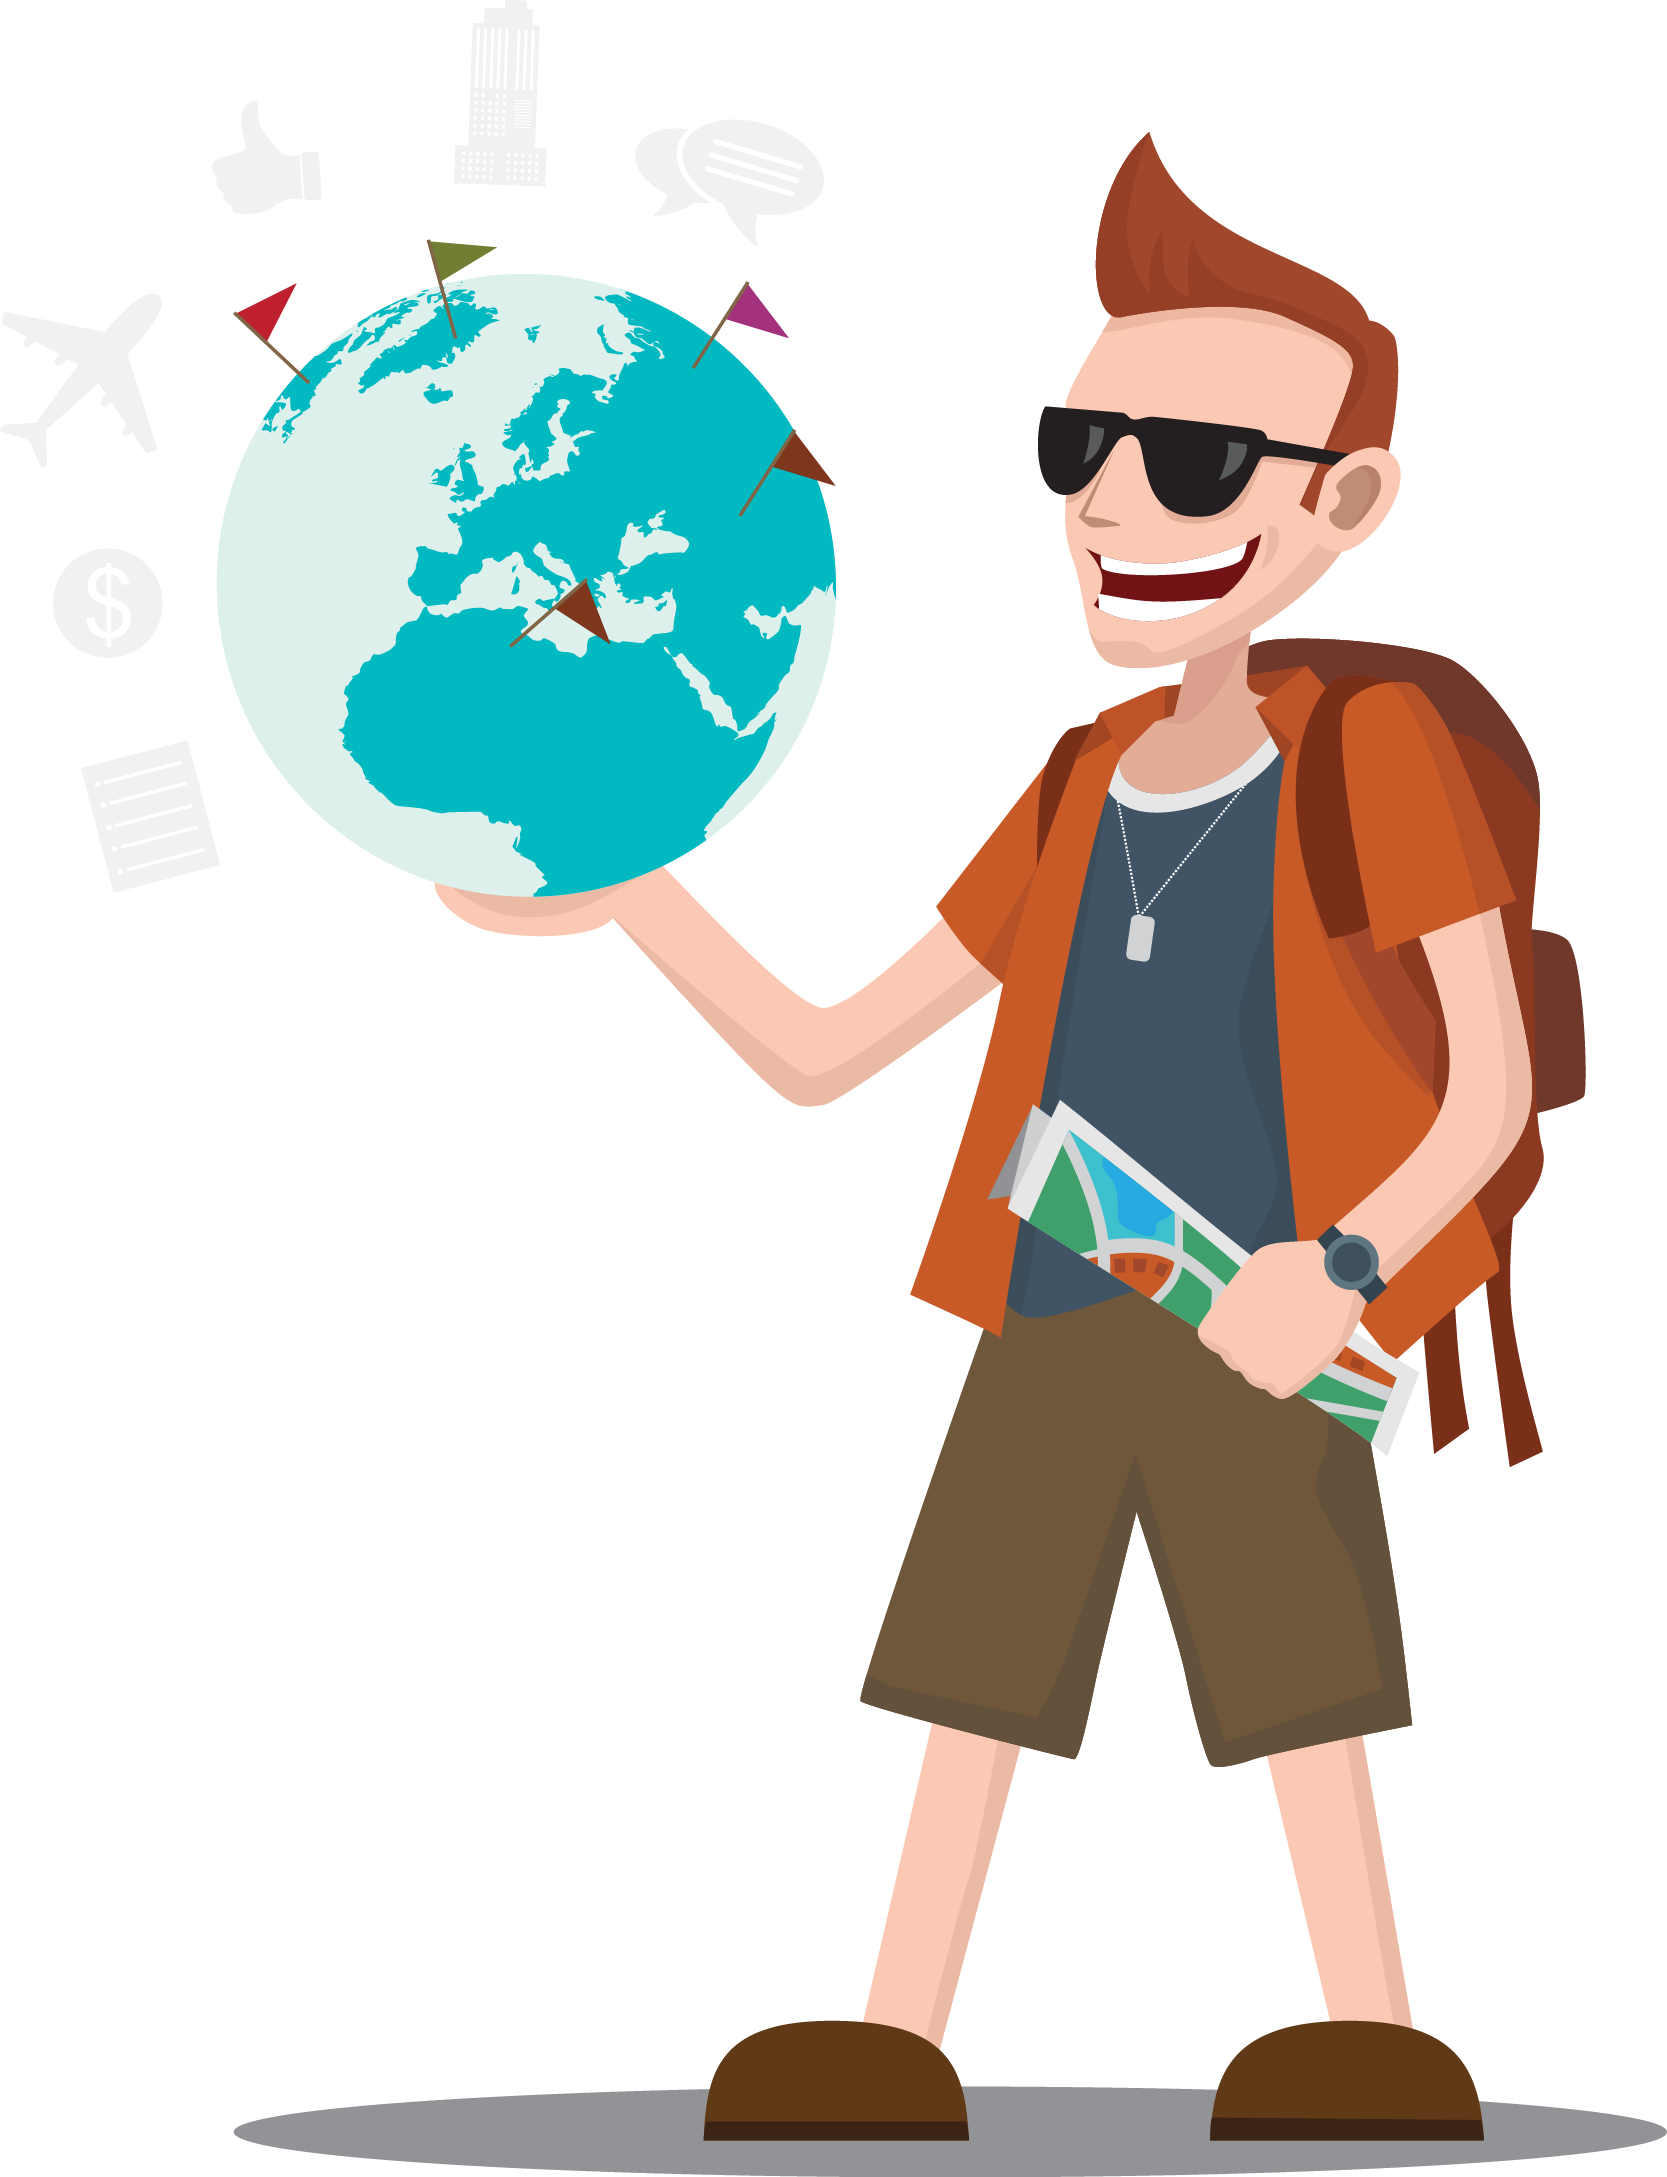 Passport clipart tourism. Wright brothers travel to